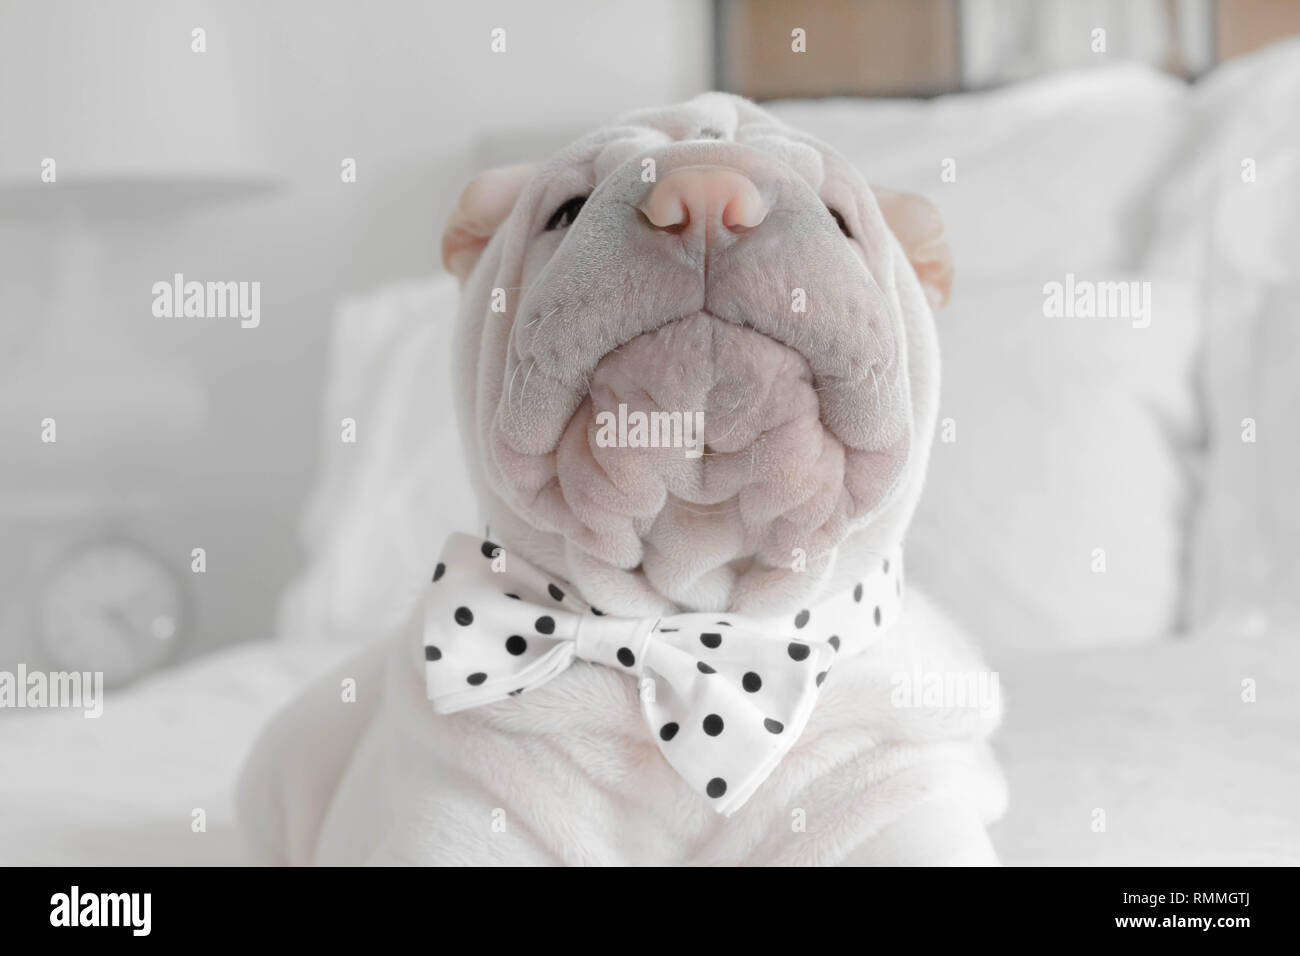 Shar pei puppy dog wearing a bow tie Stock Photo